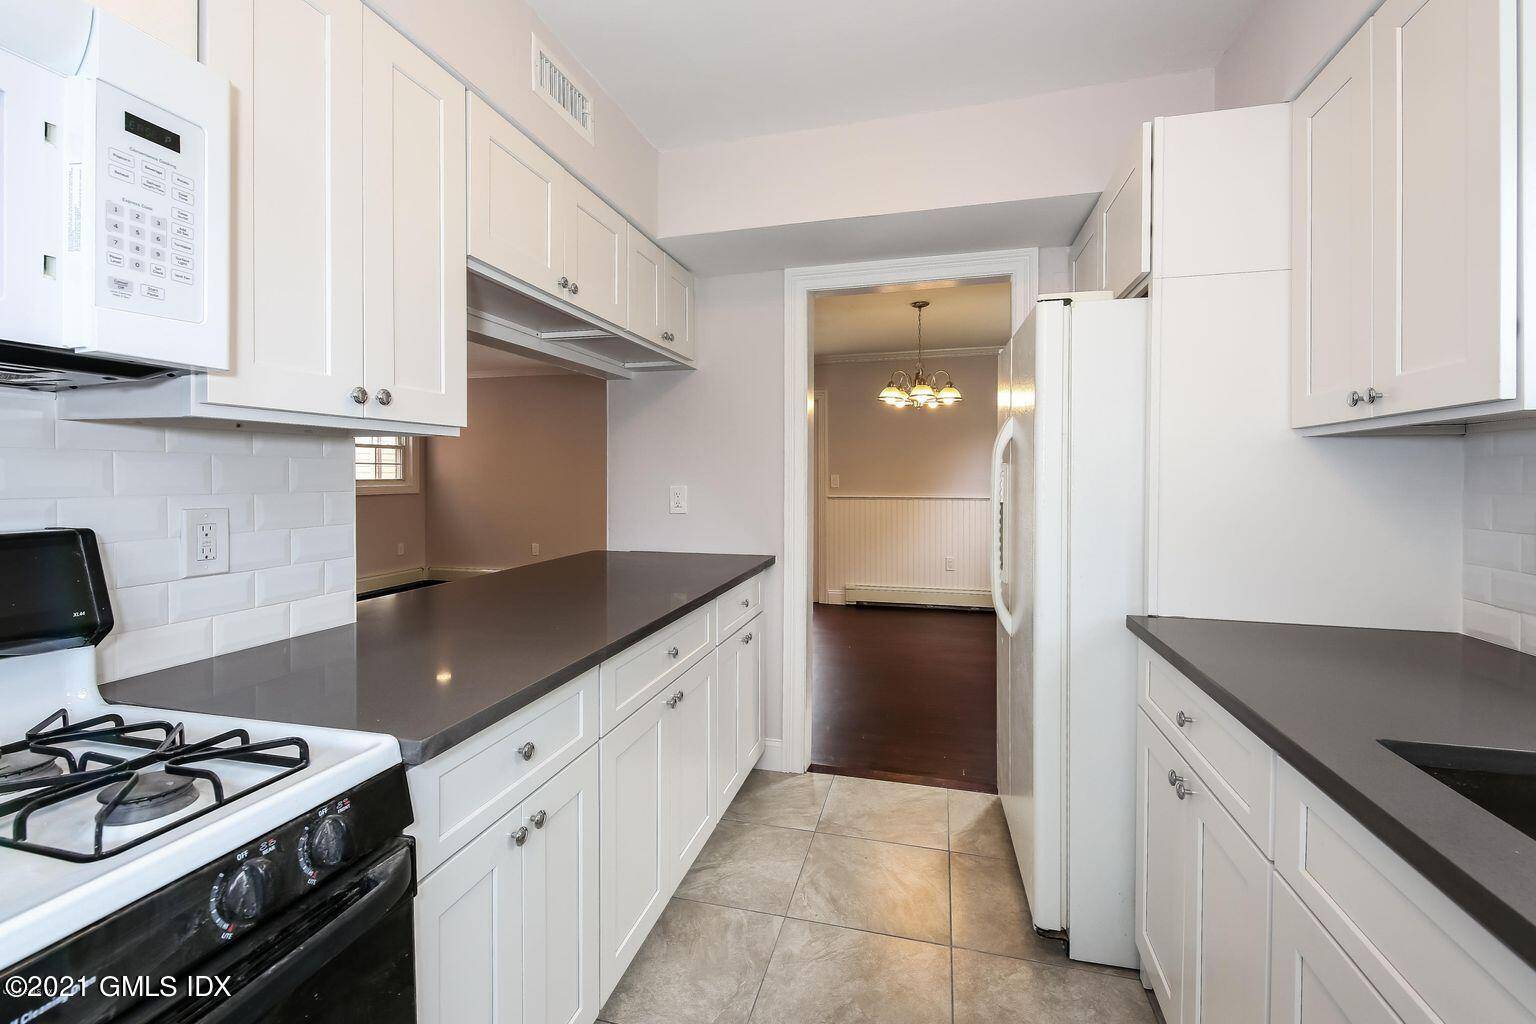 Downtown Greenwich Luxury two bedroom plus loft townhome recently and completely renovated.